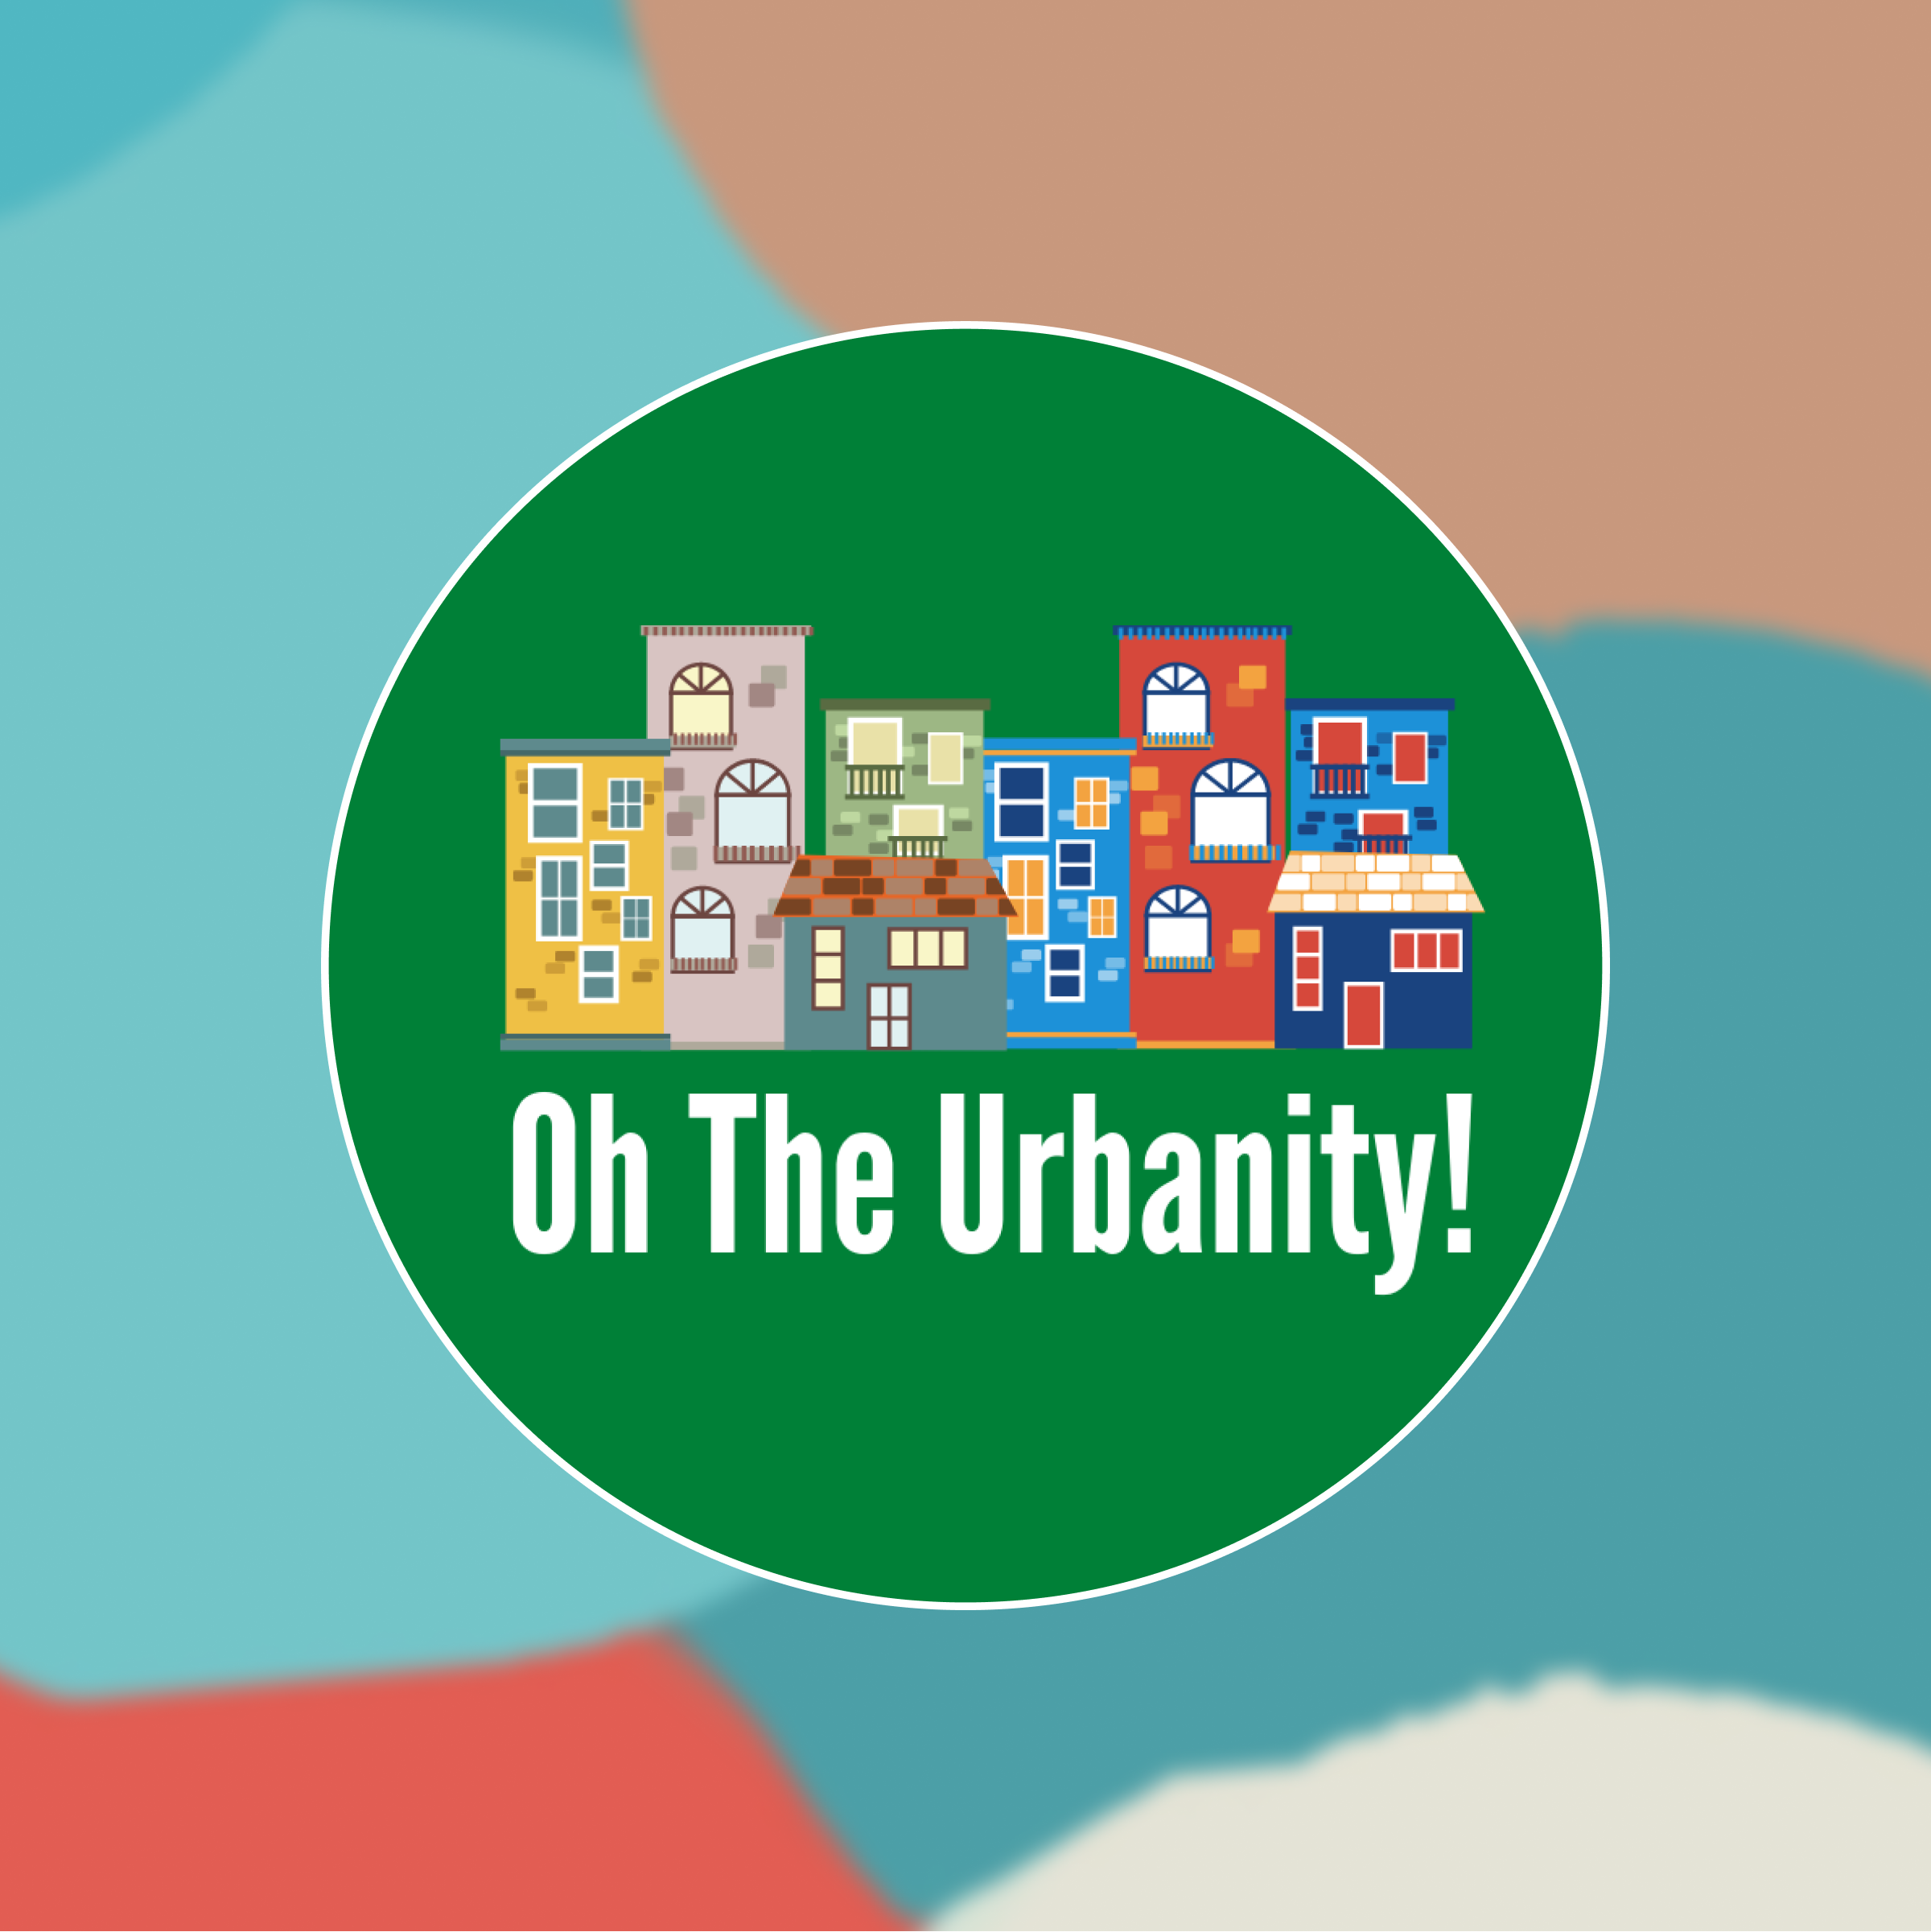 Logo of Oh The Urbanity! against an abstract painted background